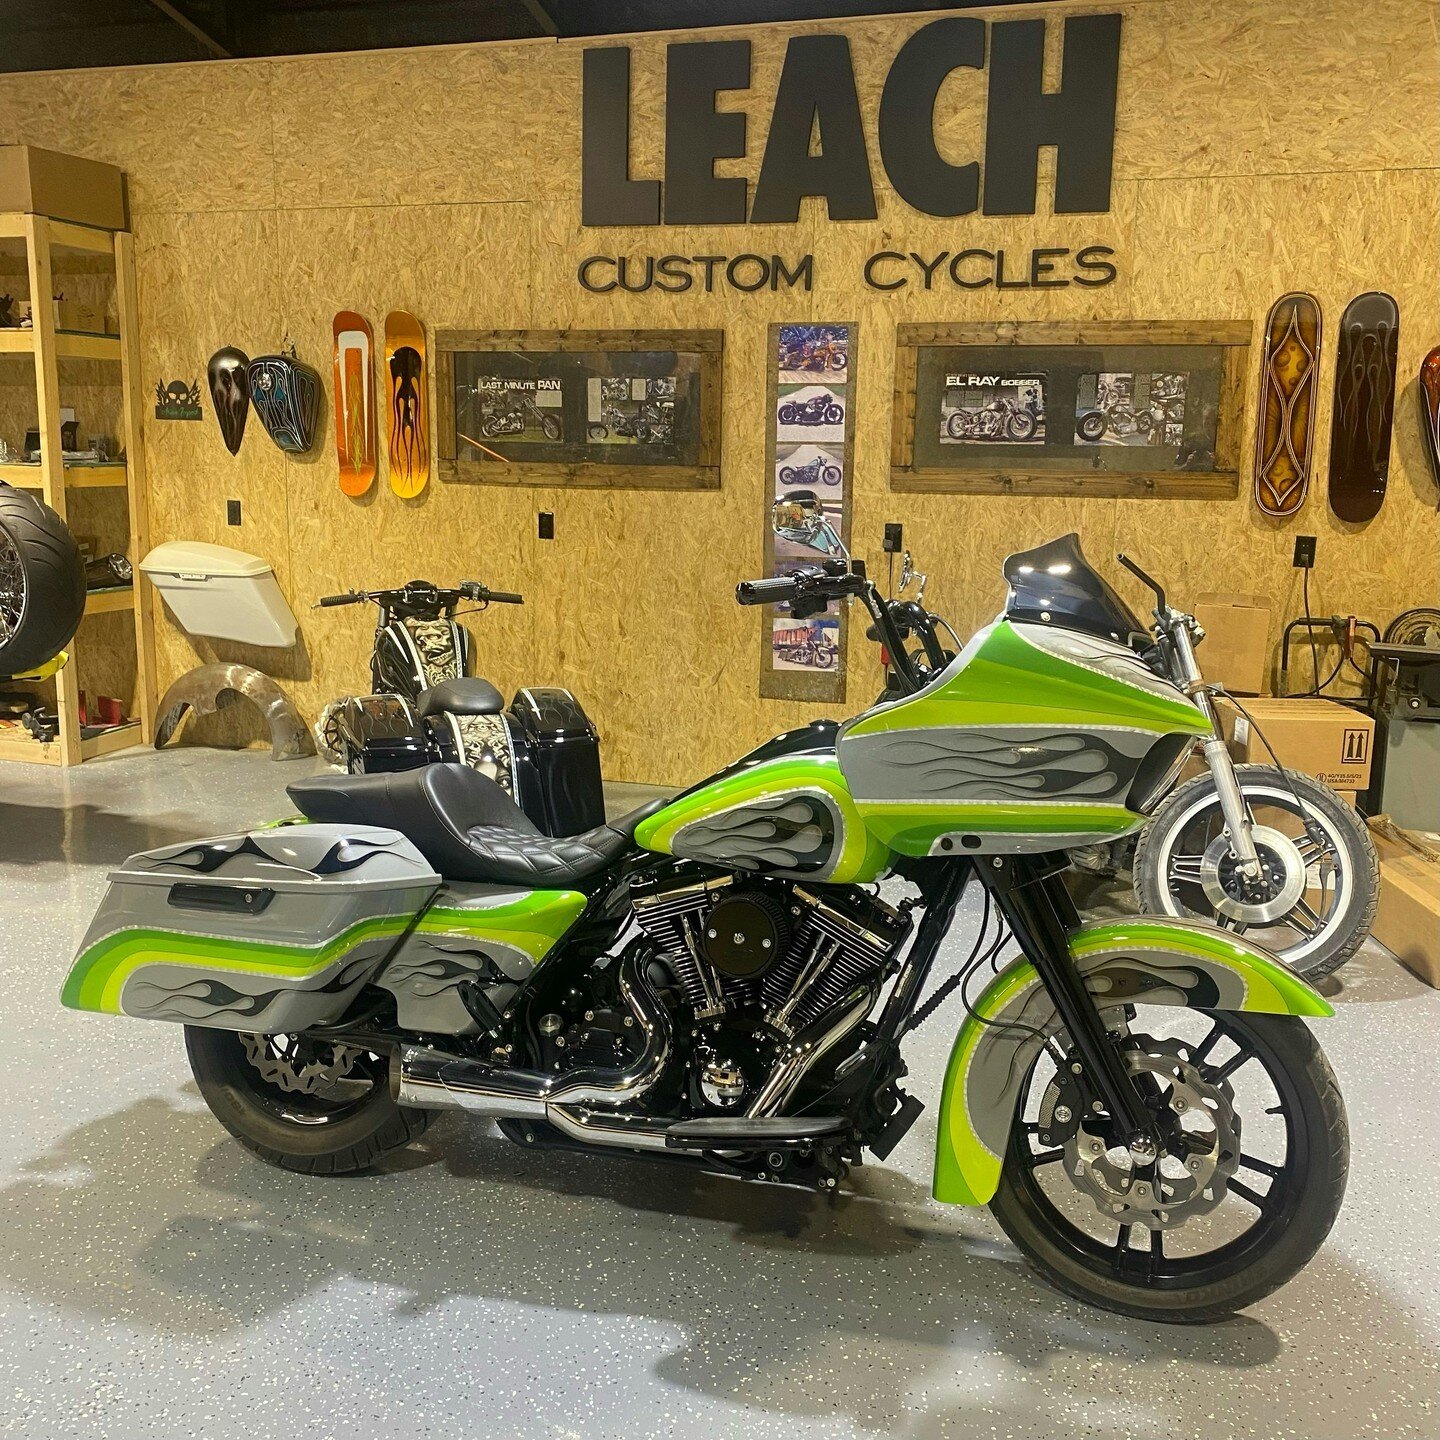 We decided to give our 2009 streetglide a twist by transforming it into a late model roadglide, complete with a fresh custom paint job.